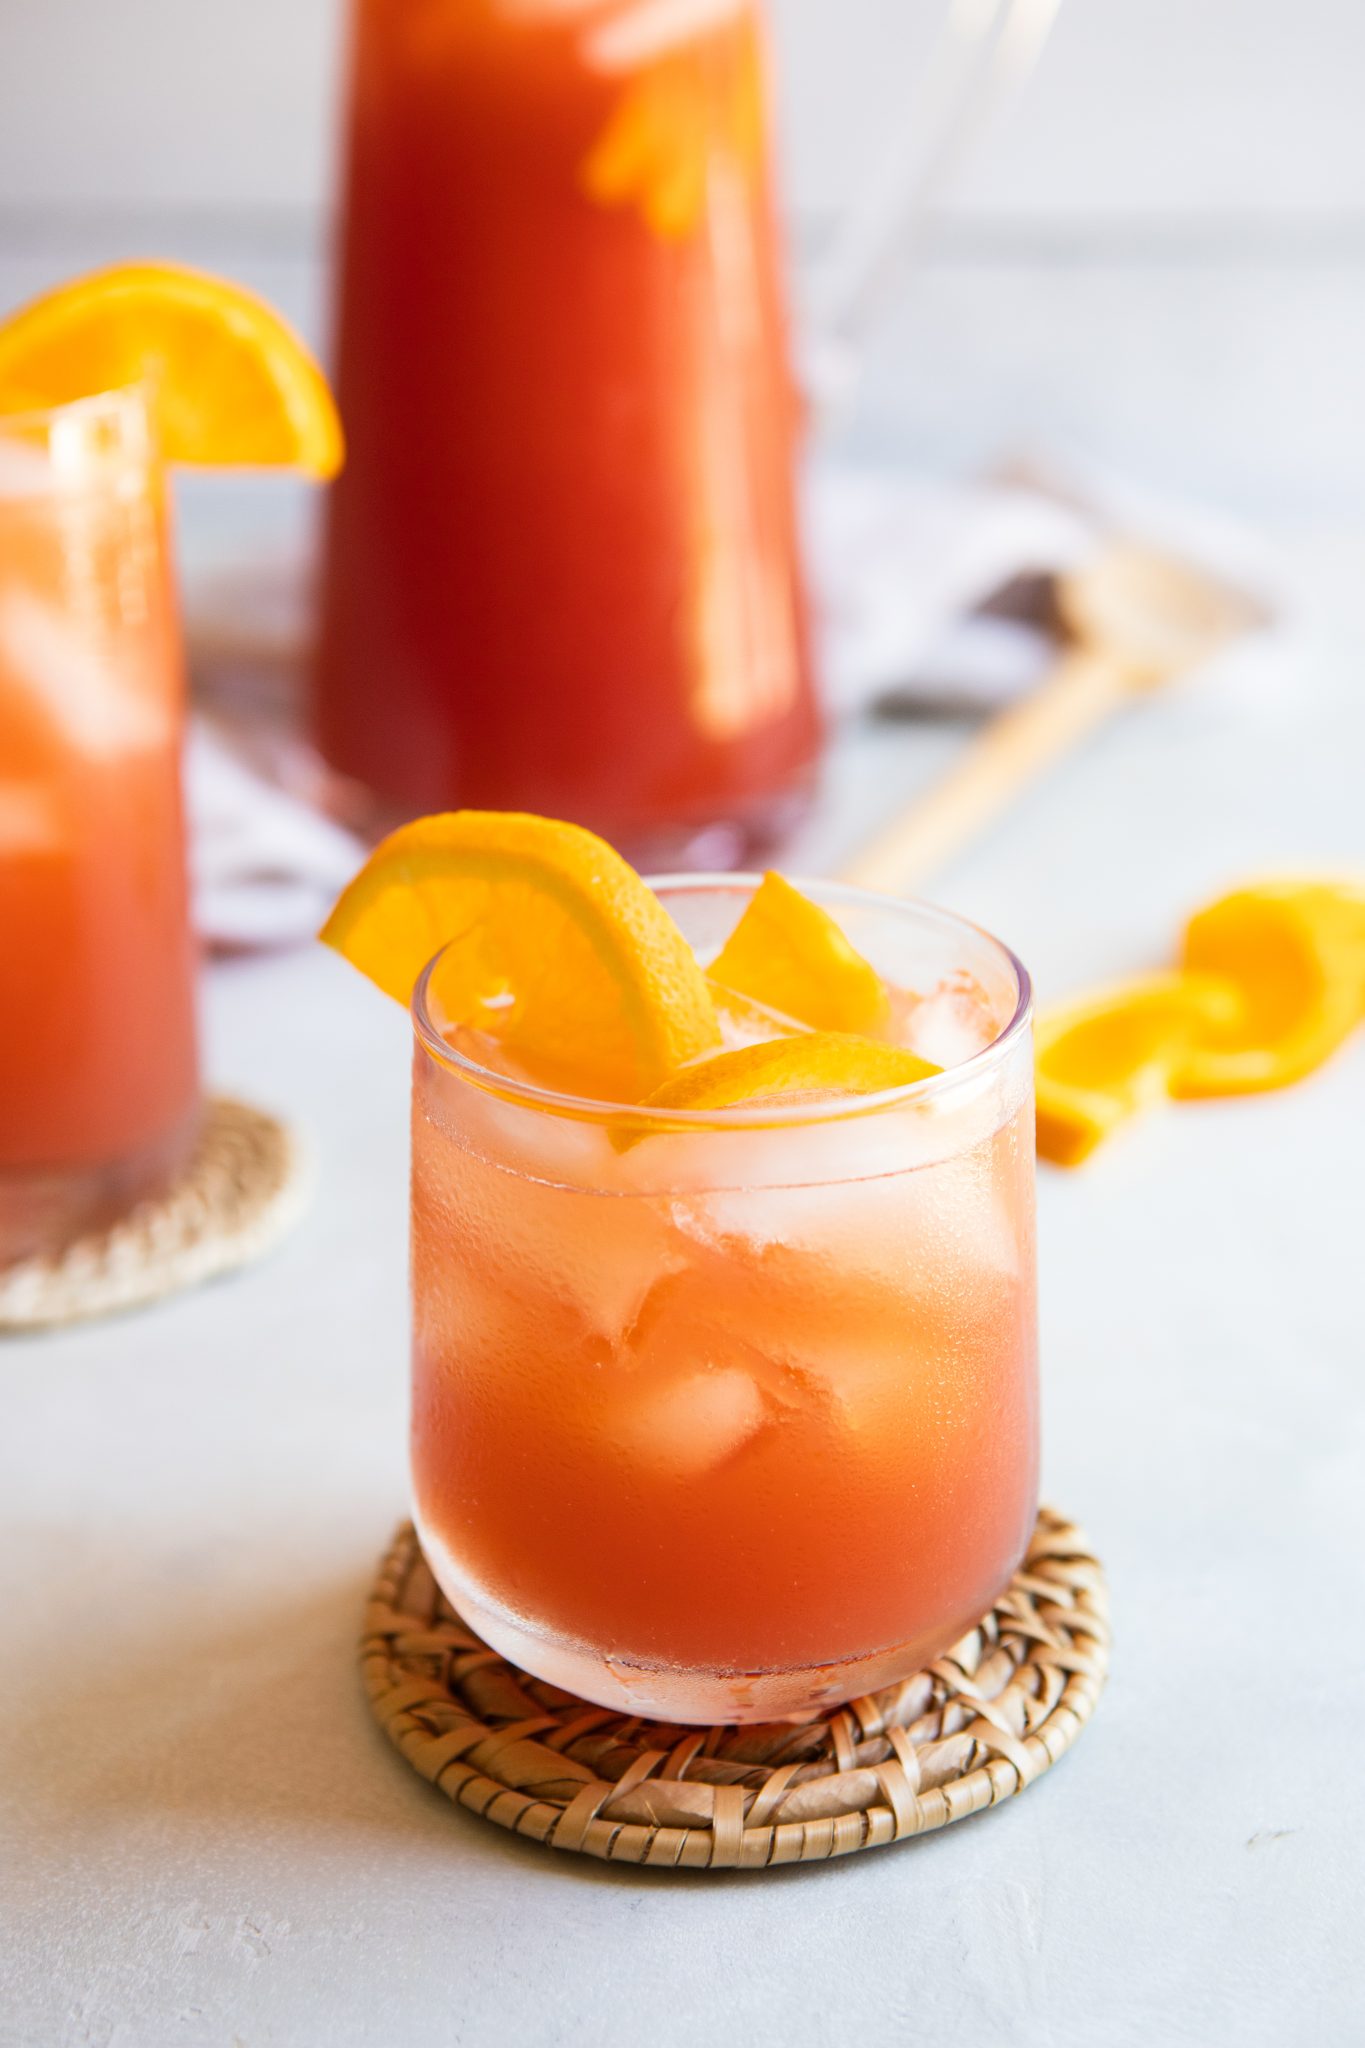 fruit tea recipe in a glass garnished with orange slices